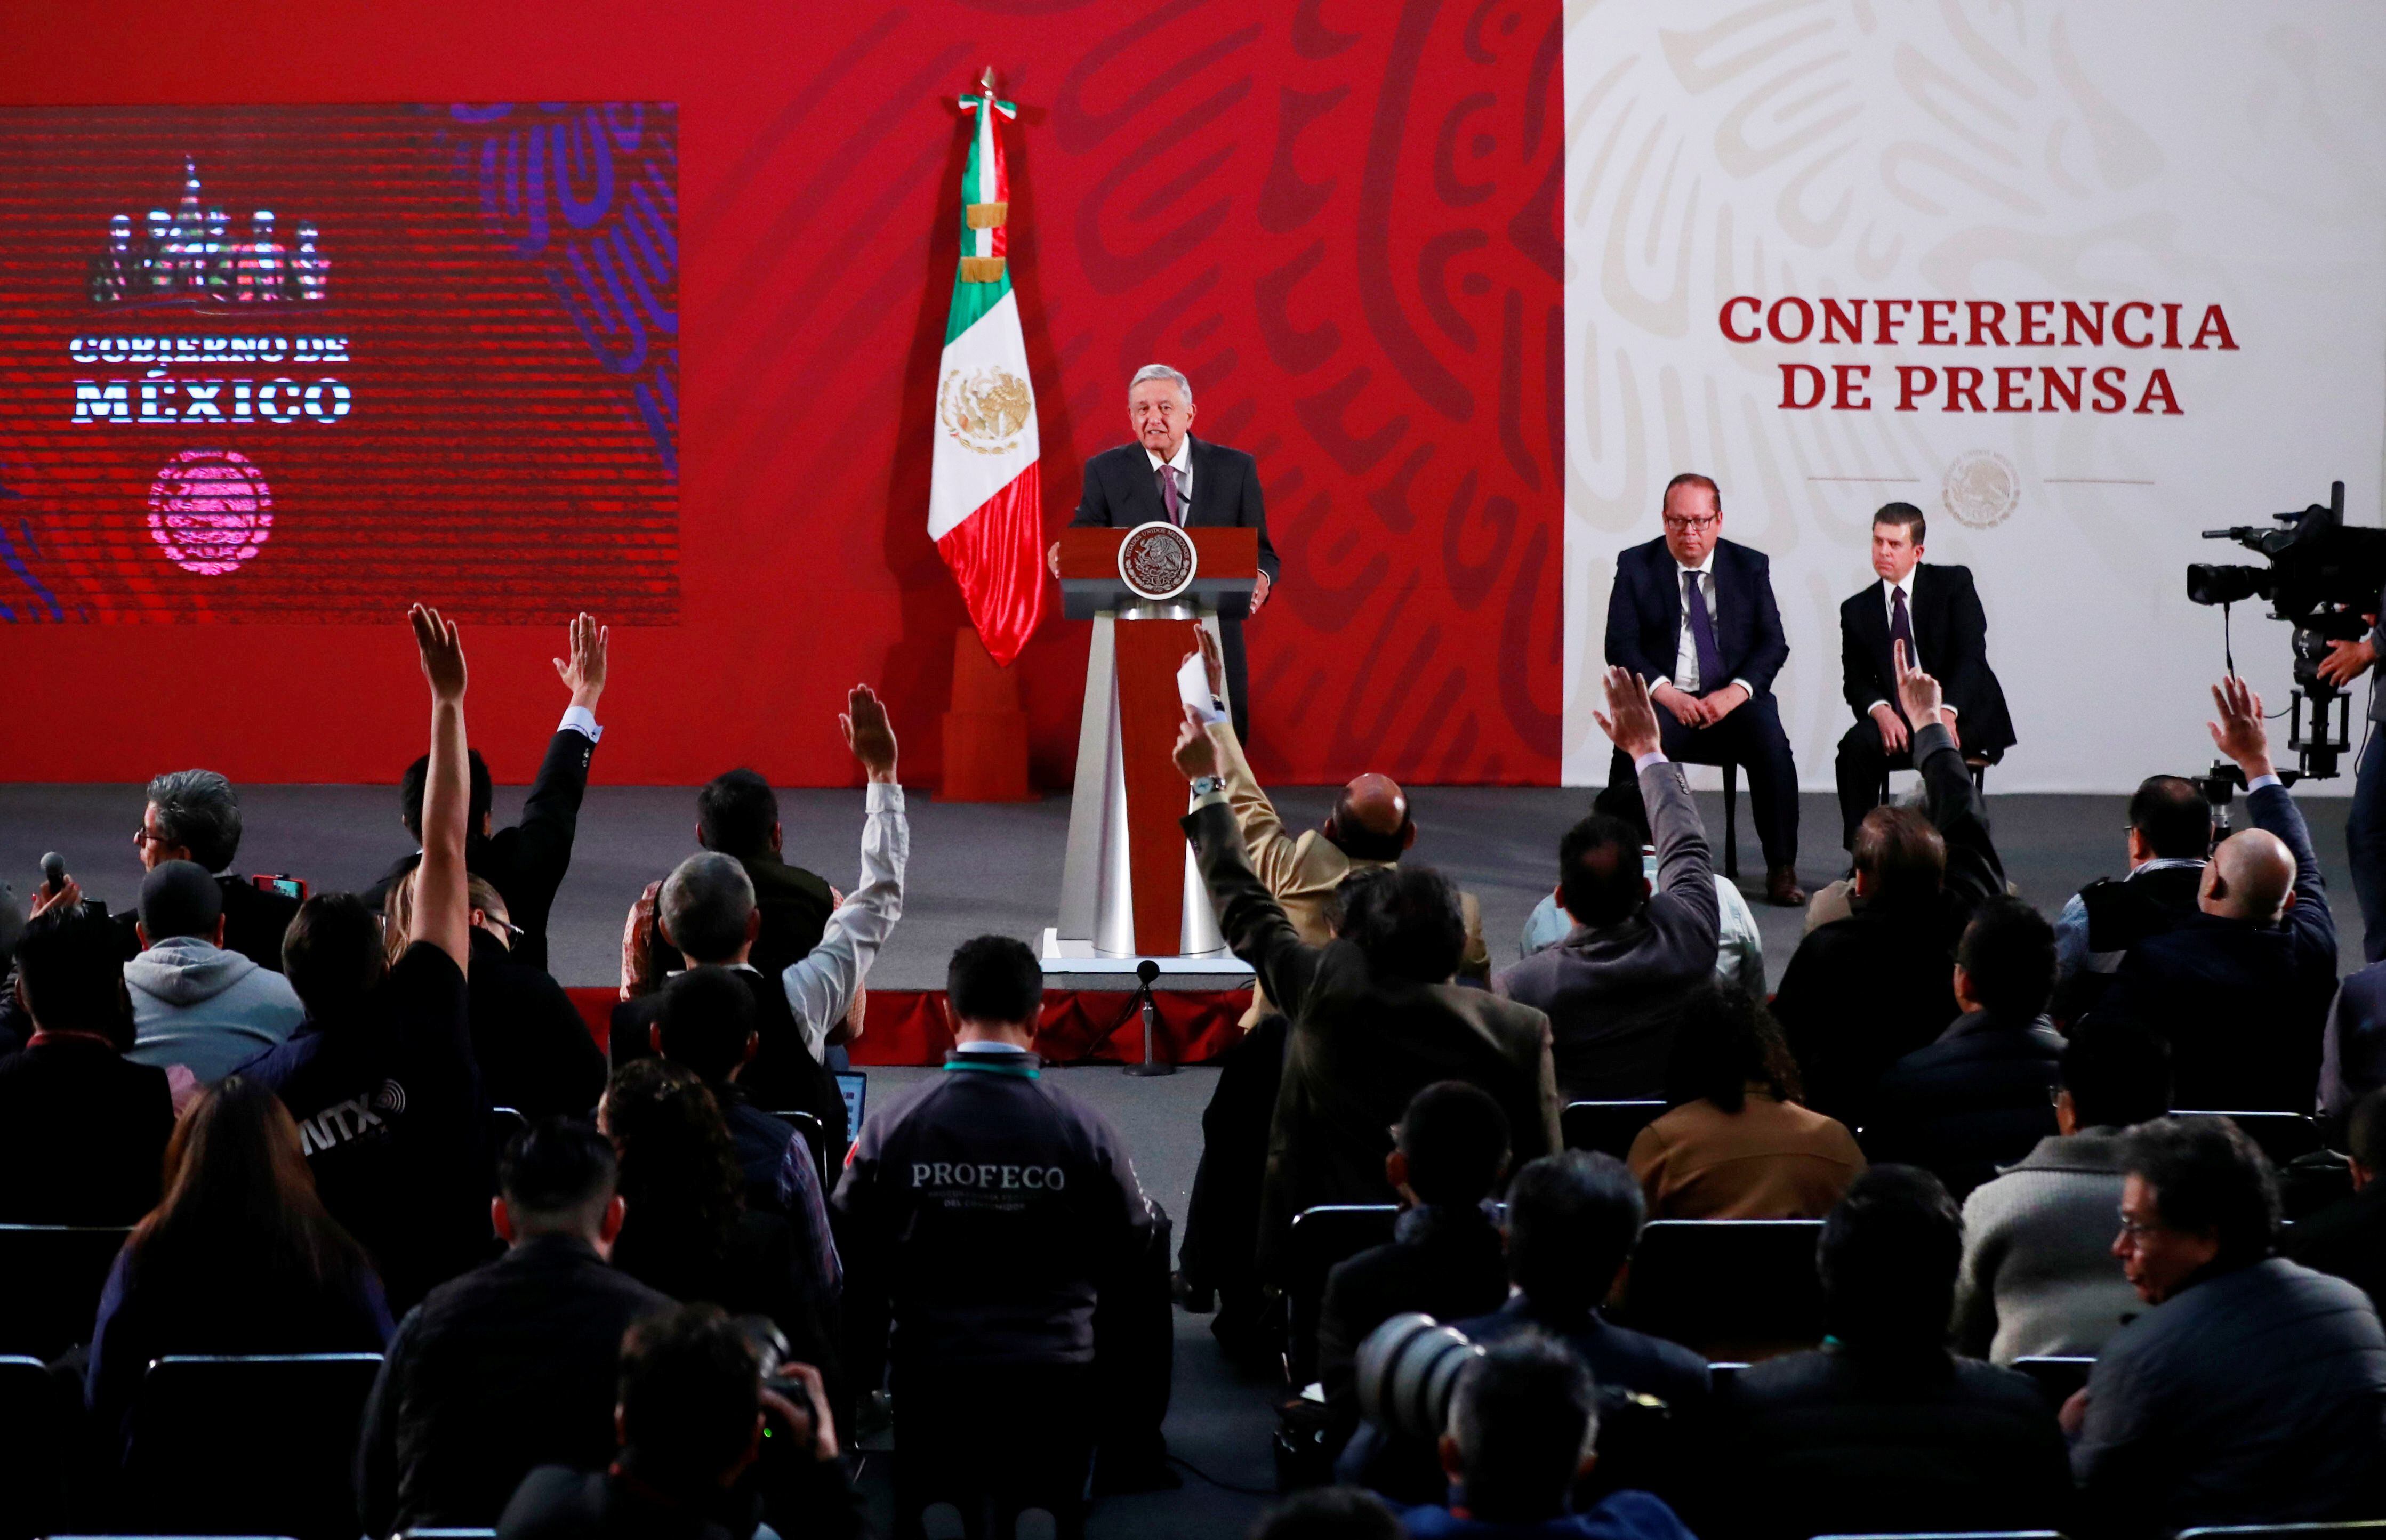 Mexico's President Andres Manuel Lopez Obrador speaks during a news conference at the National Palace in Mexico City, Mexico, March 9, 2020. REUTERS/Henry Romero